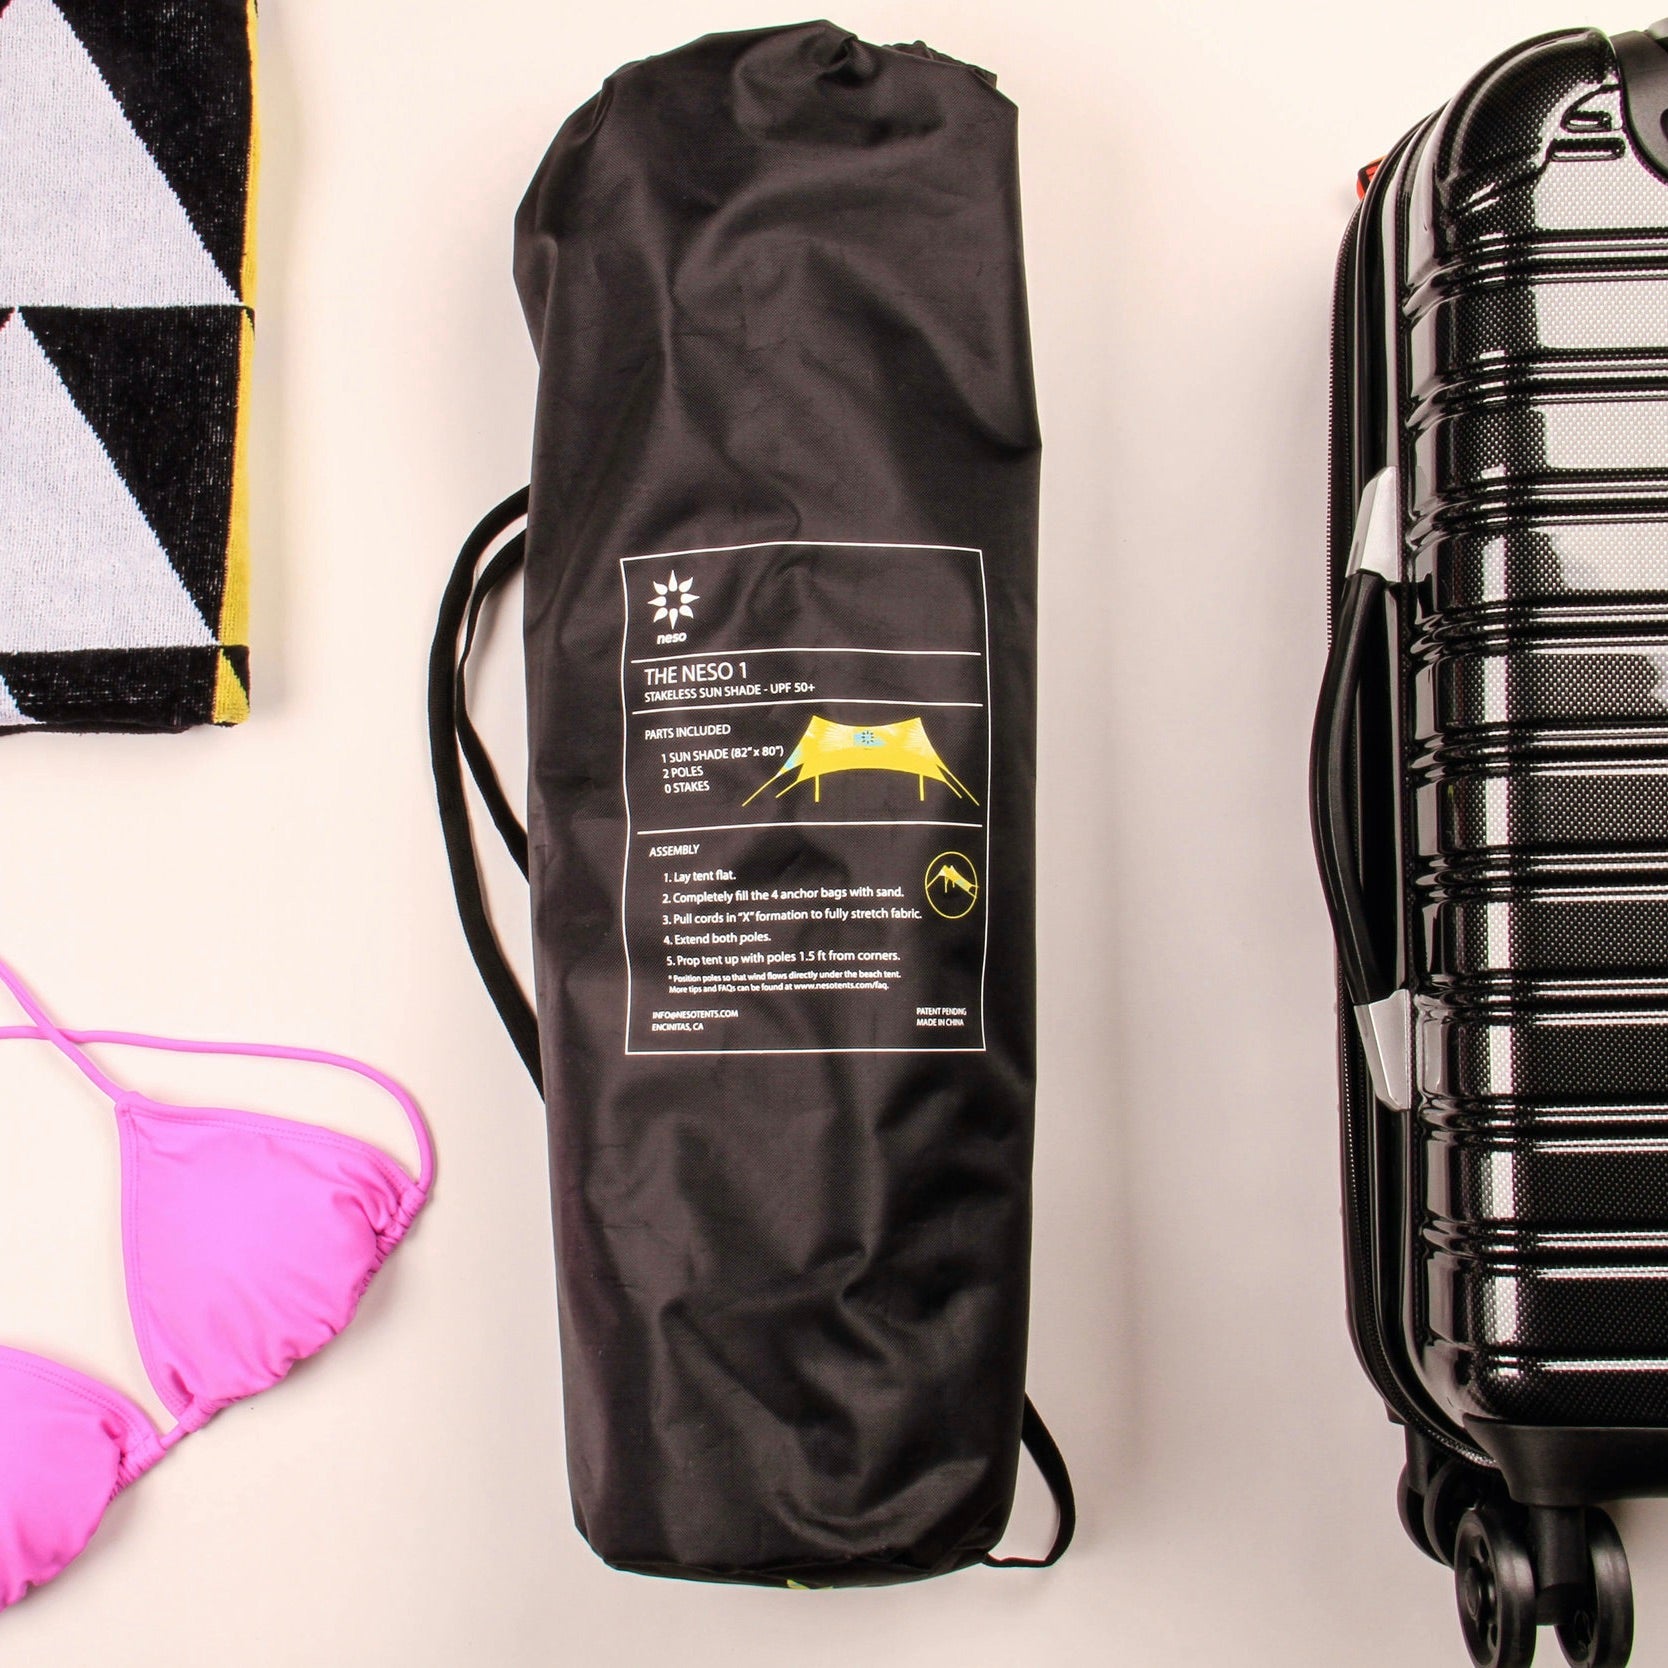 One-pound backpack becomes a bivy tent in 30 seconds